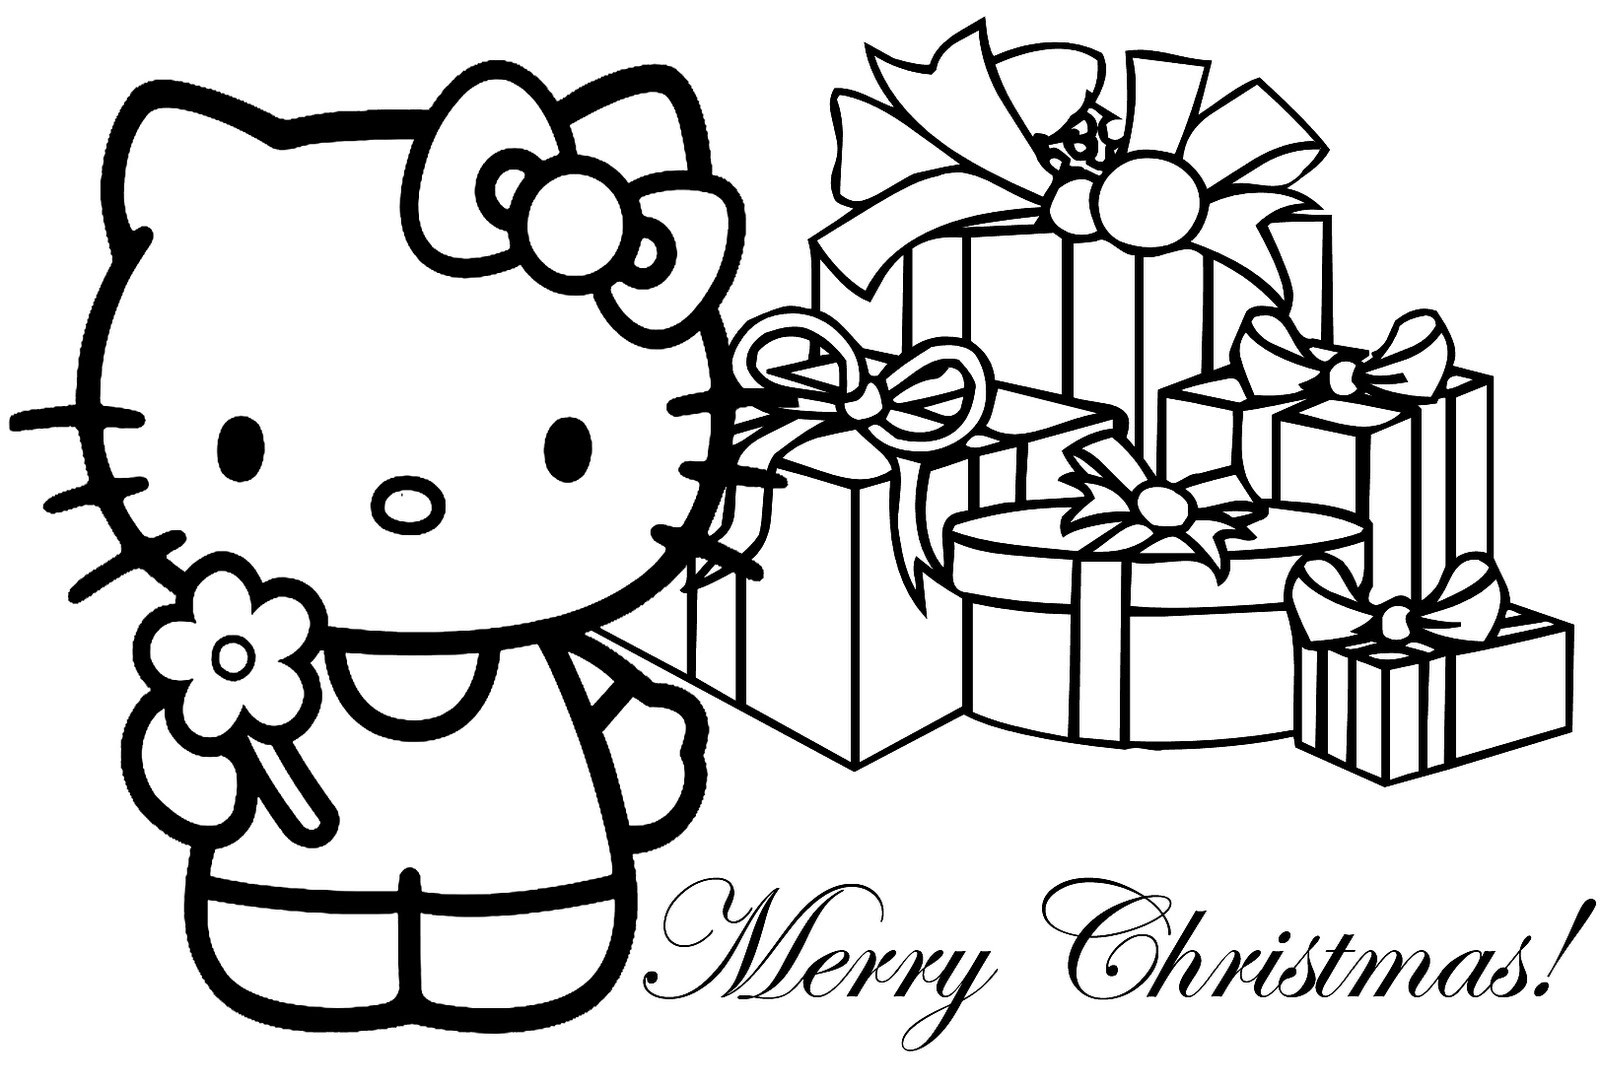 Christmas Kids Coloring Page
 Free Printable Merry Christmas Coloring Pages